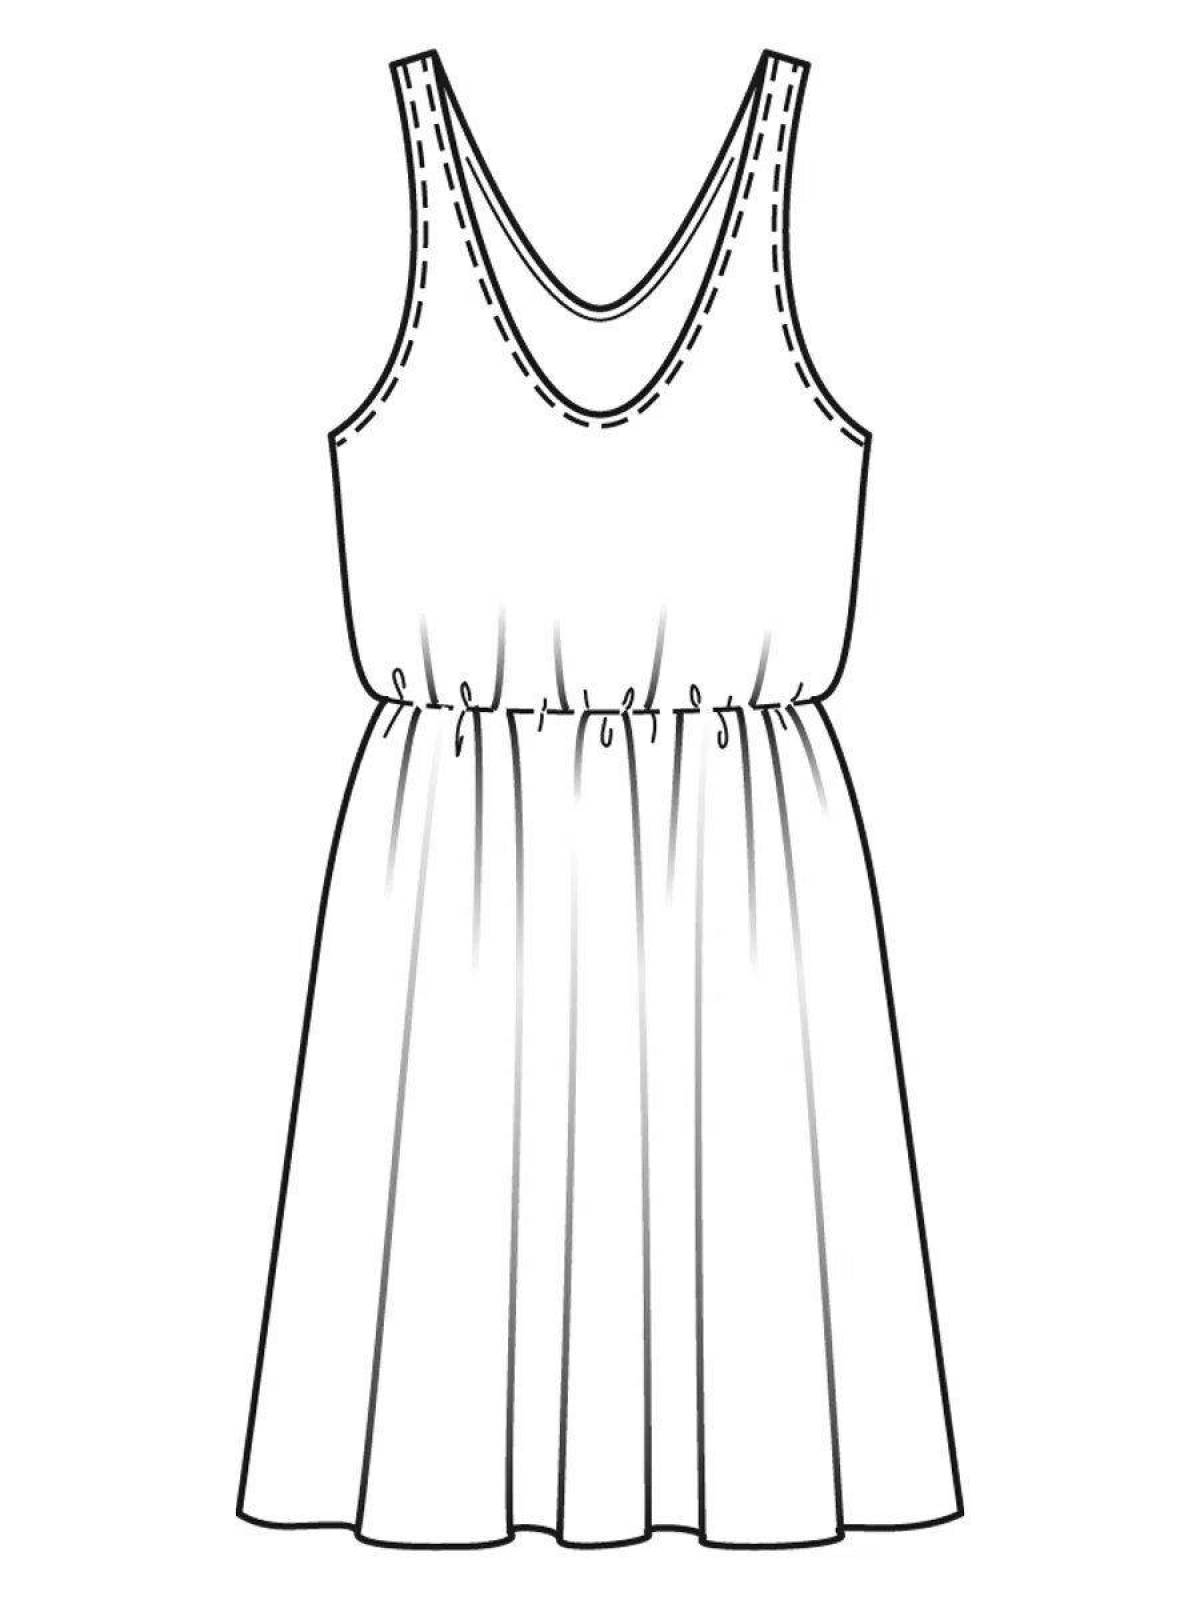 Coloring page cute sundresses for kids